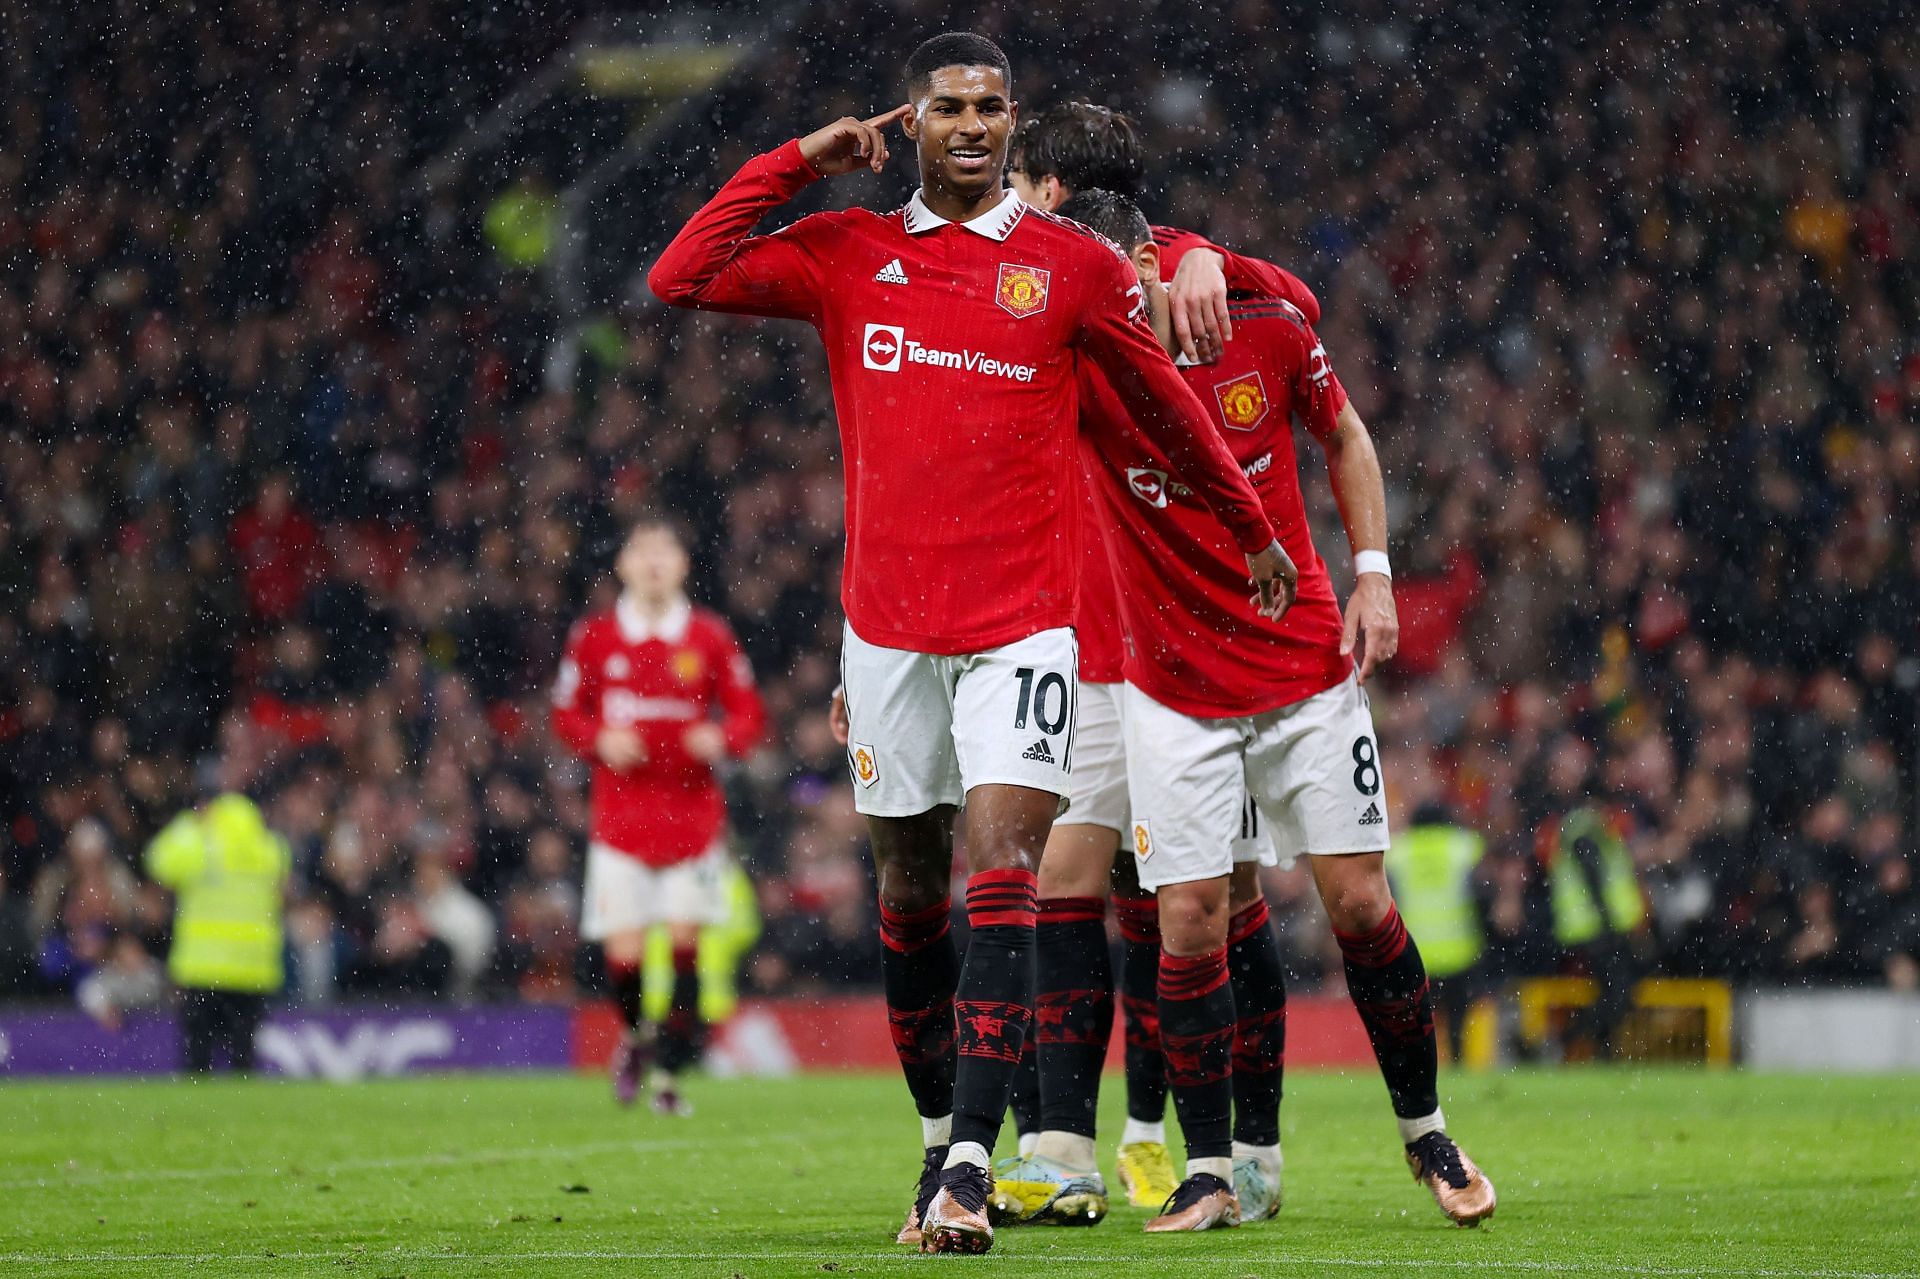 Rashford continued his fine run of goal-scoring form in this game